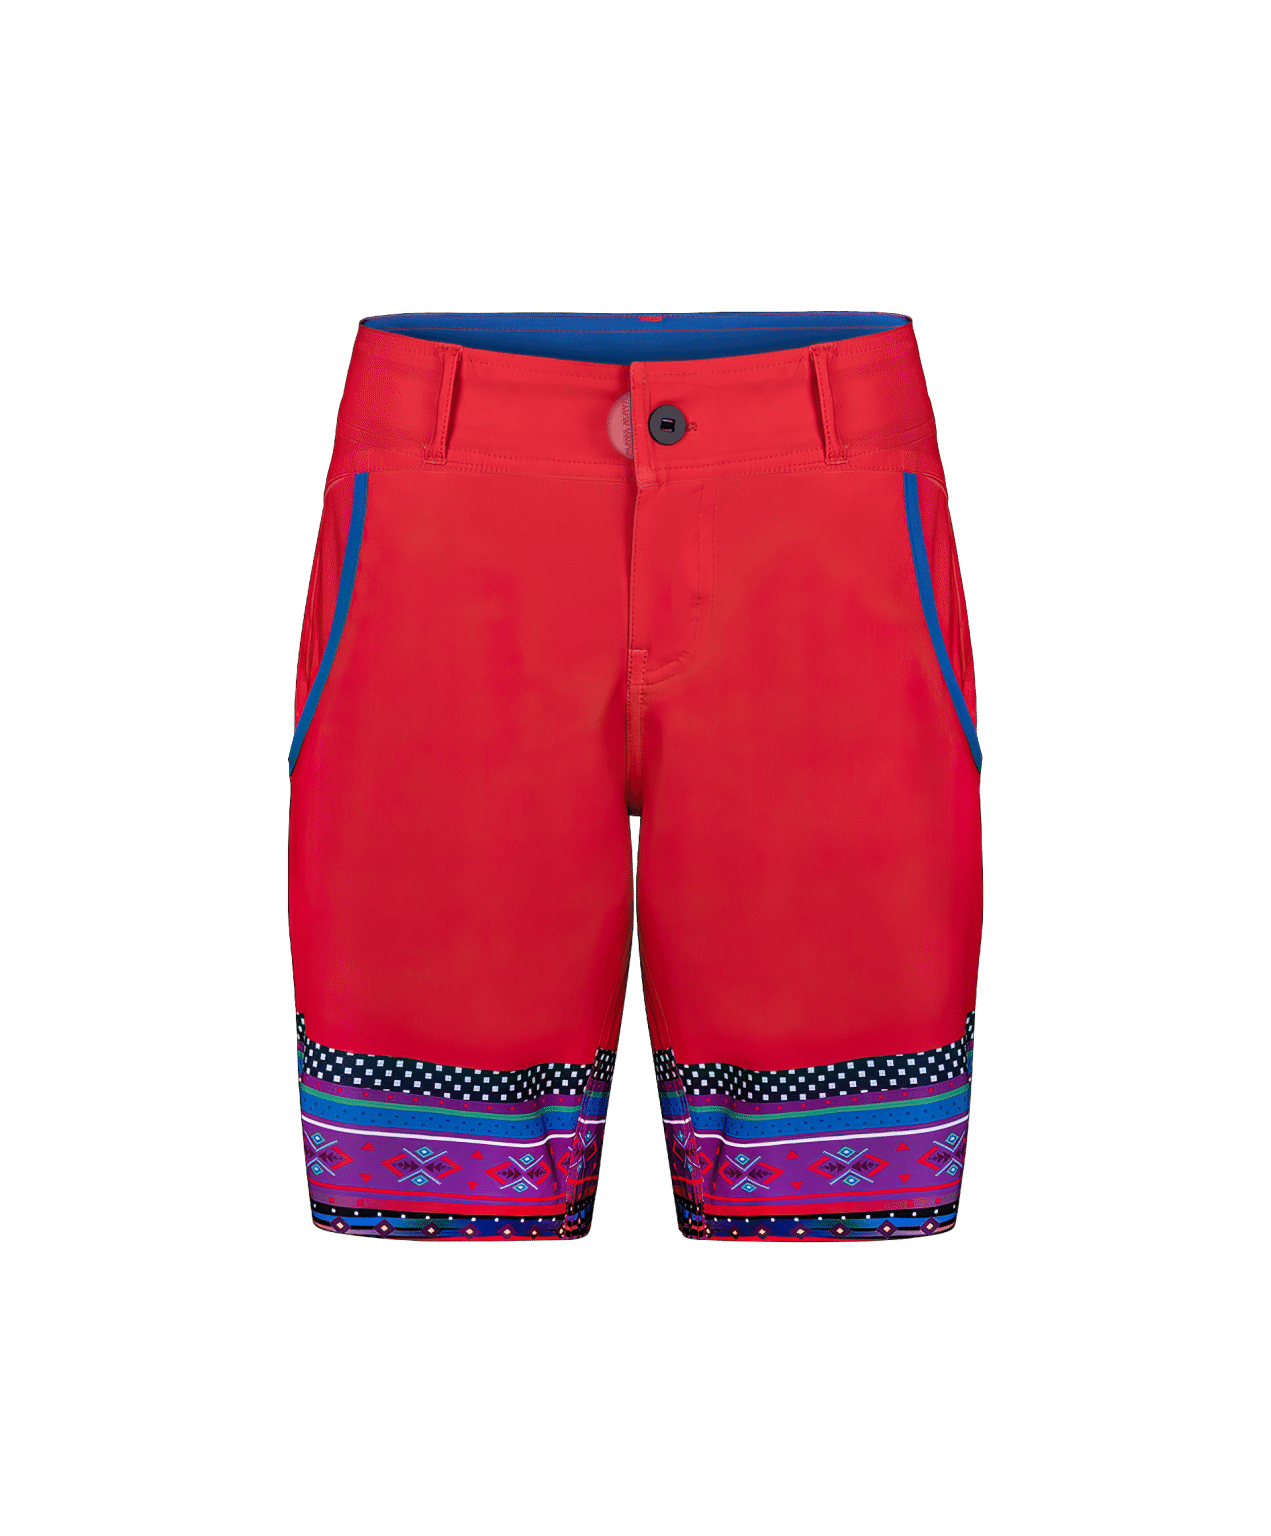 Balam shorts red from MAYA MAYA are FastDrying and light for women in the summer.